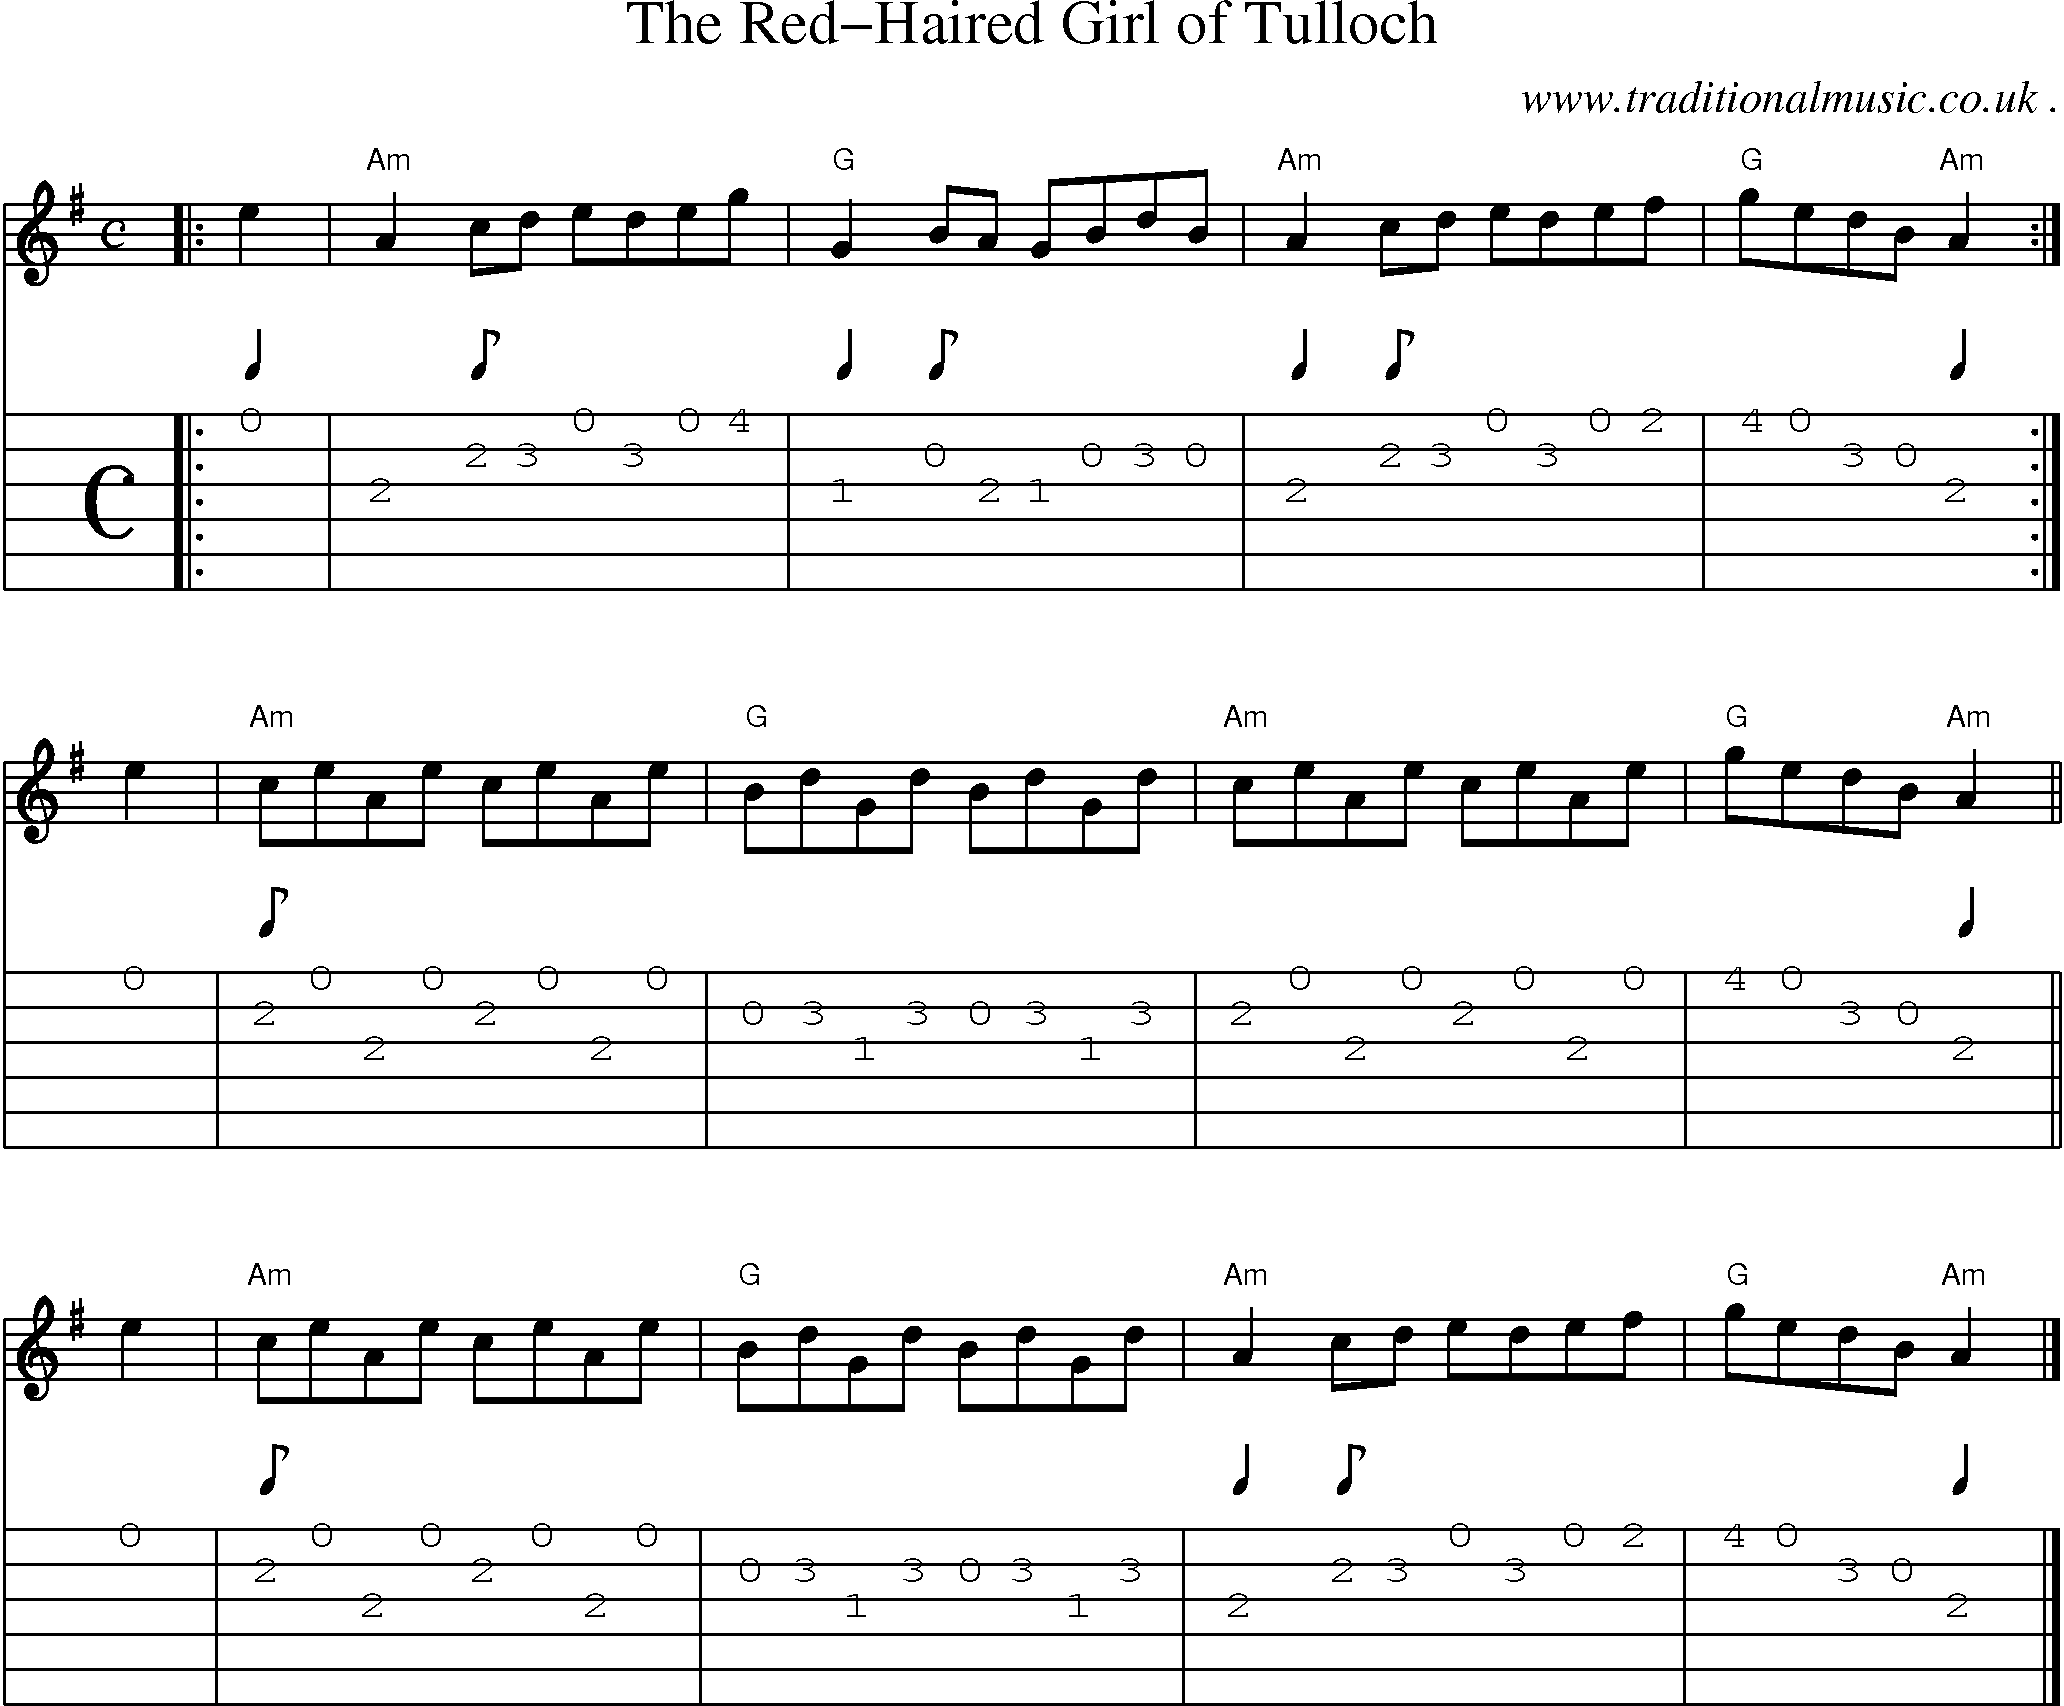 Sheet-music  score, Chords and Guitar Tabs for The Red-haired Girl Of Tulloch